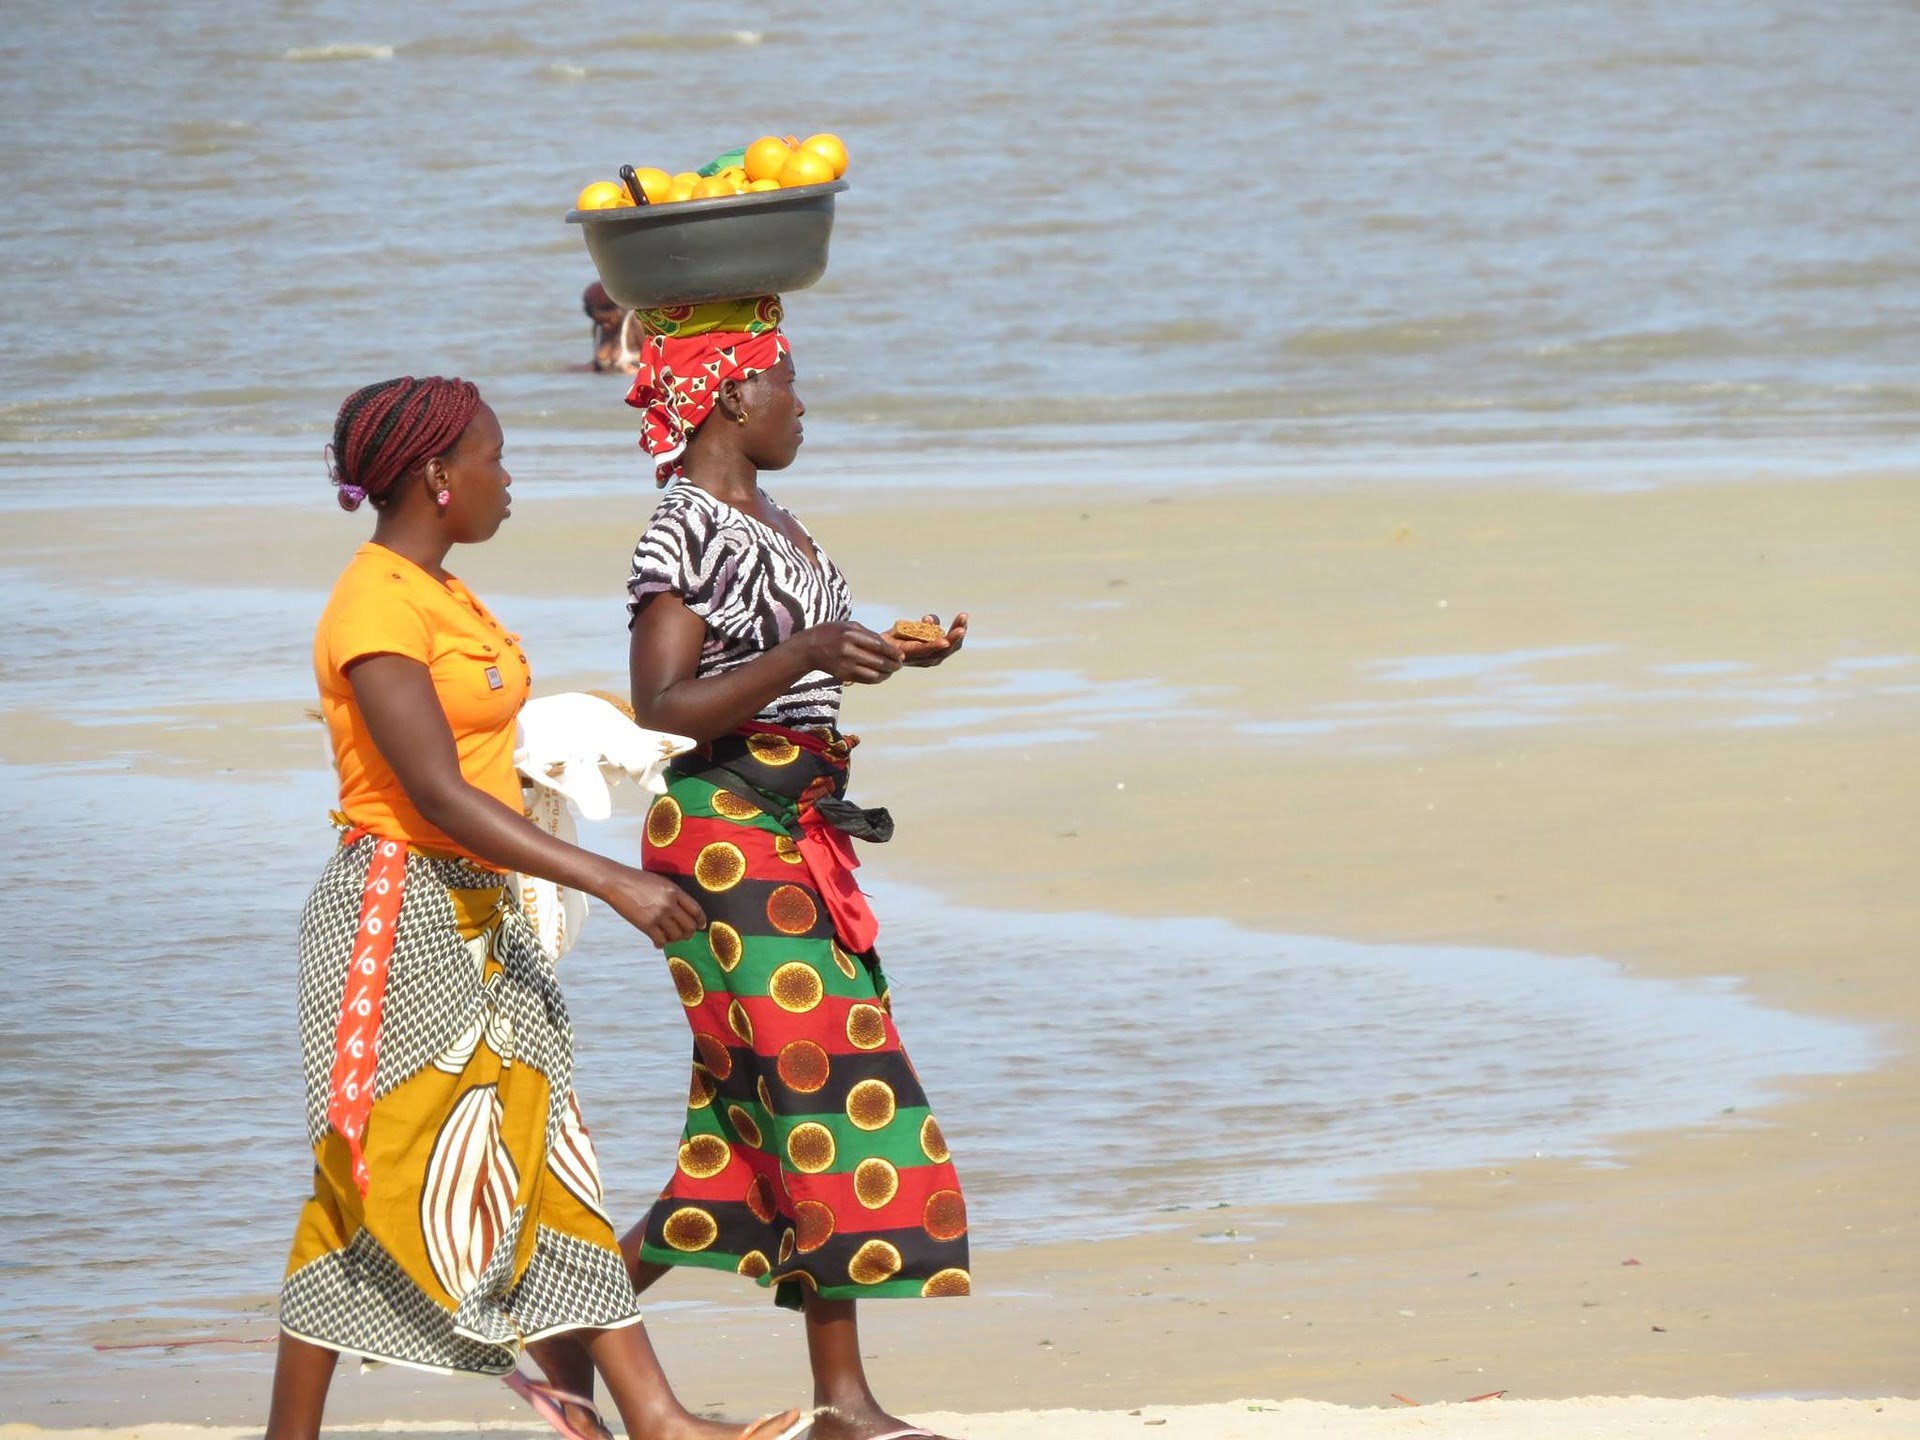 10 facts about Mozambique- A paradise for peace seekers